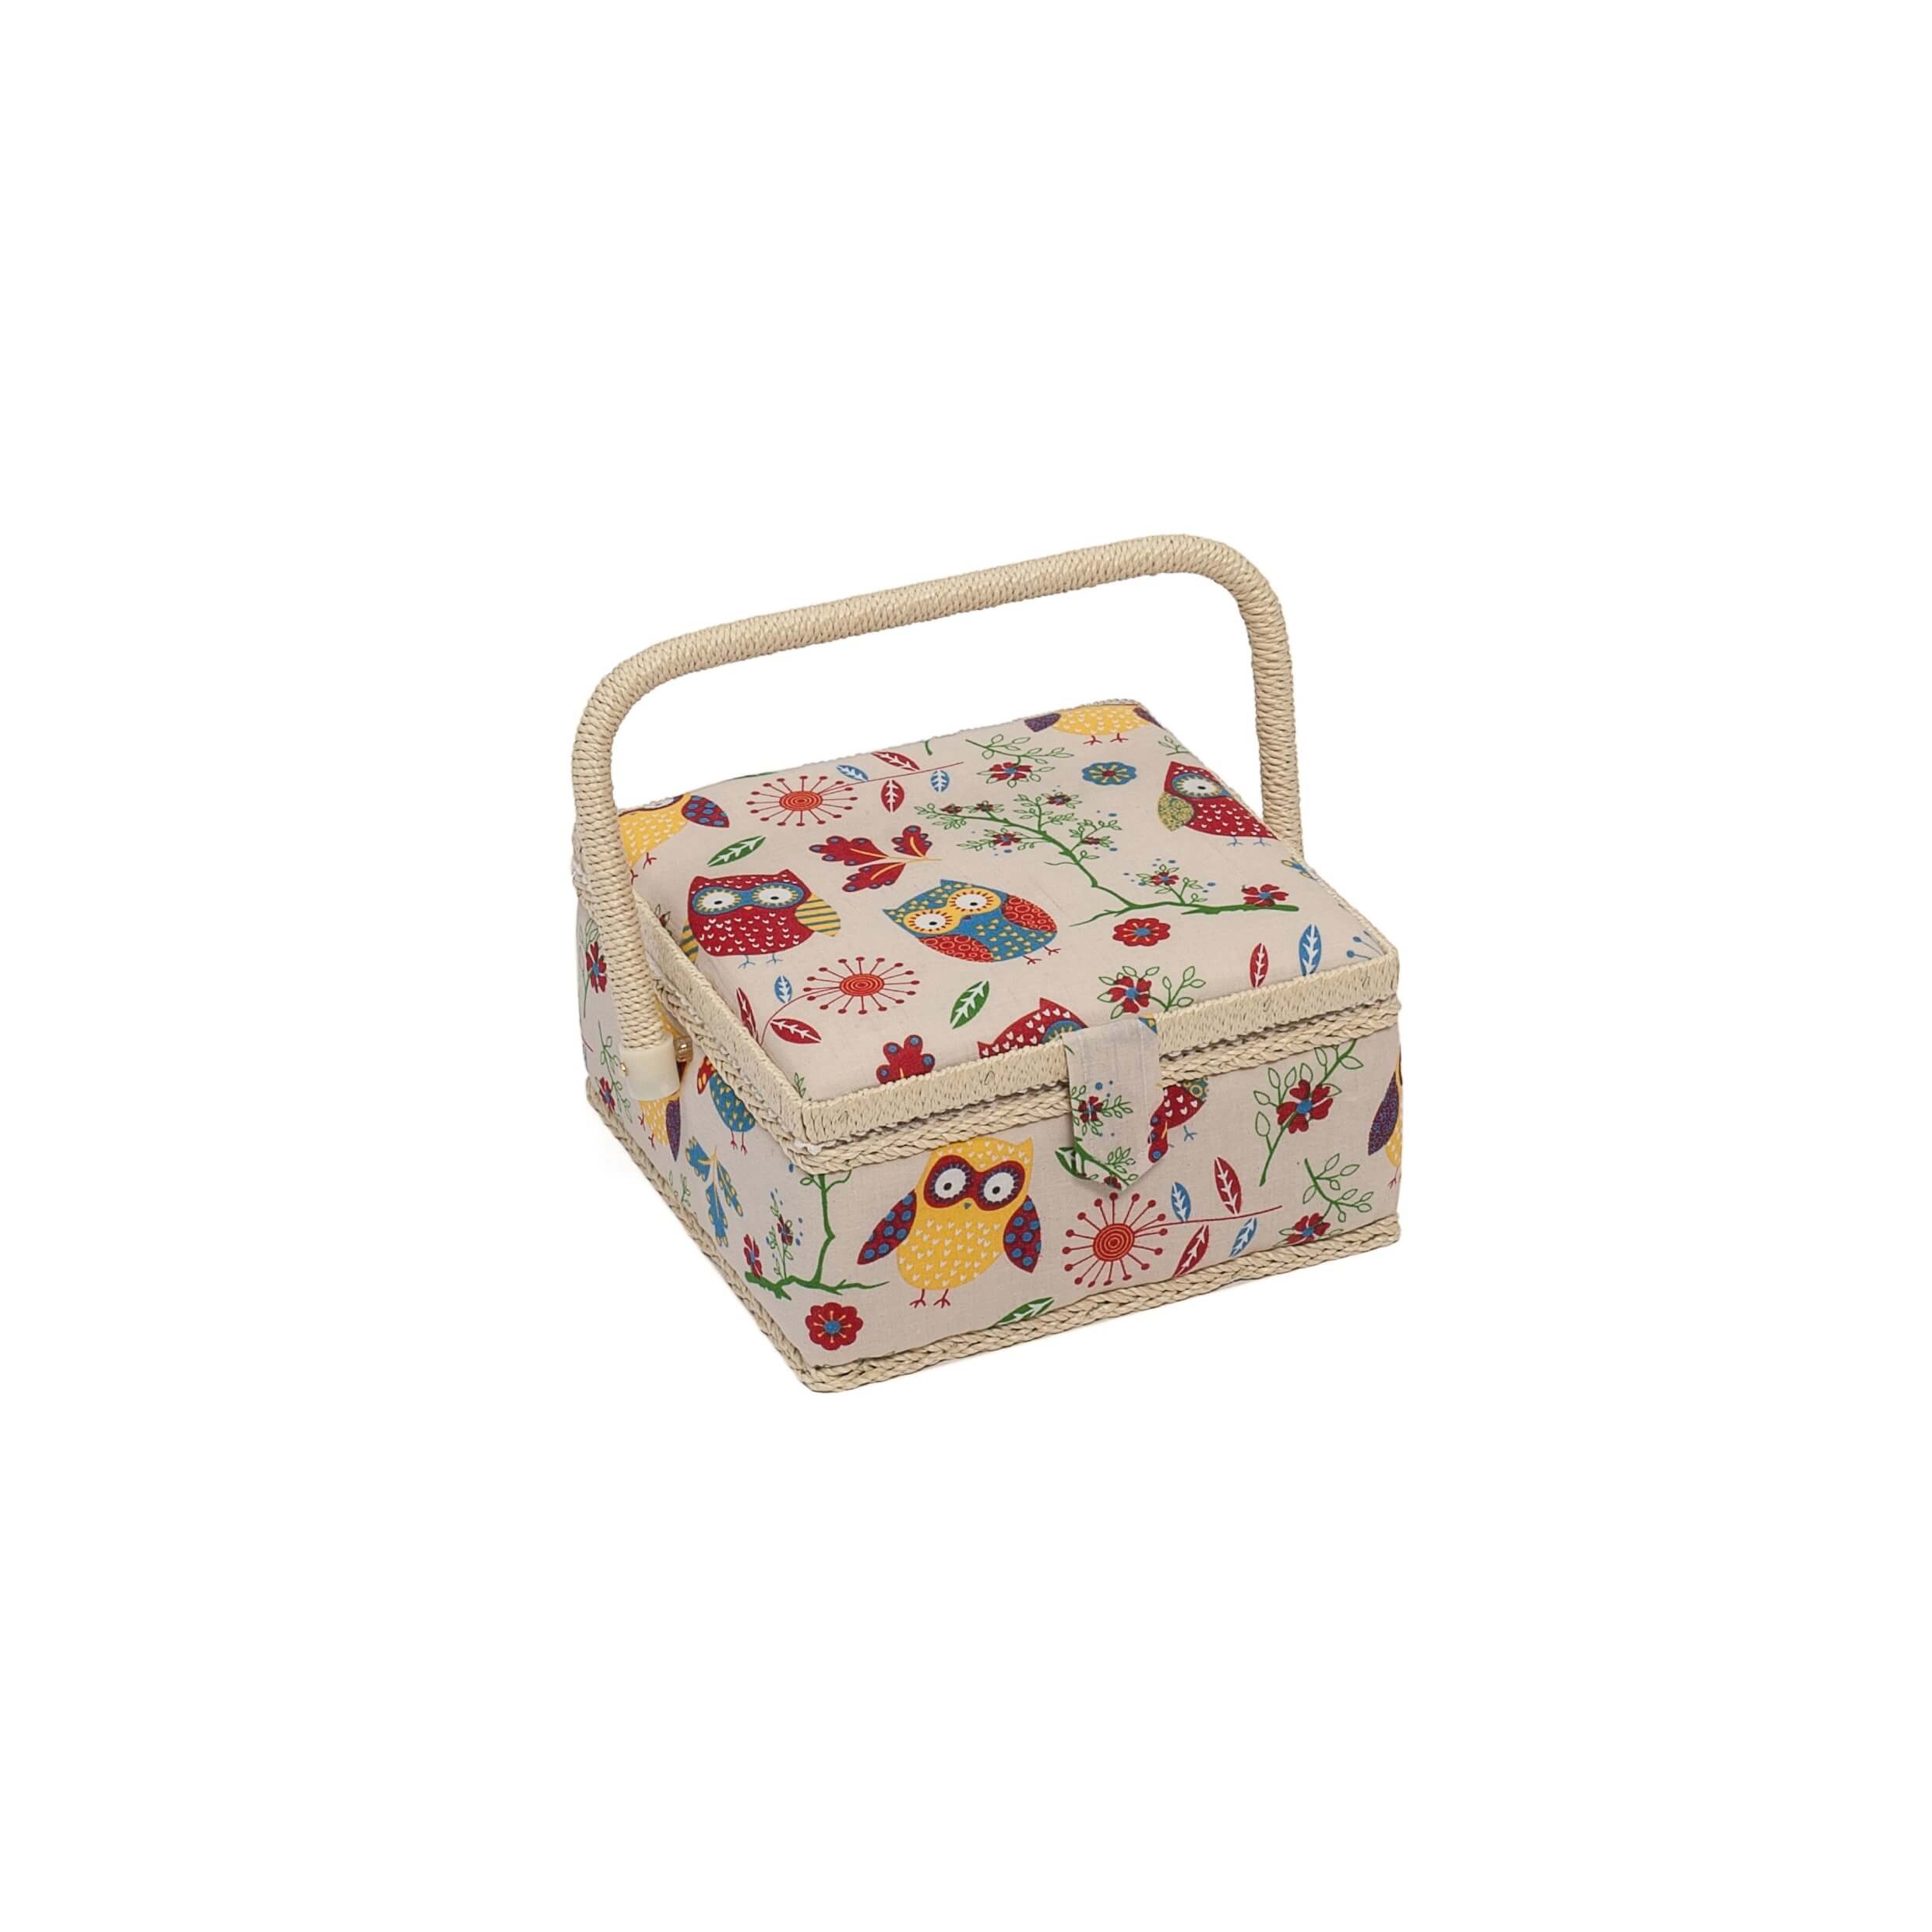 Spotted Chest Owl Small Value Sewing Craft Basket 